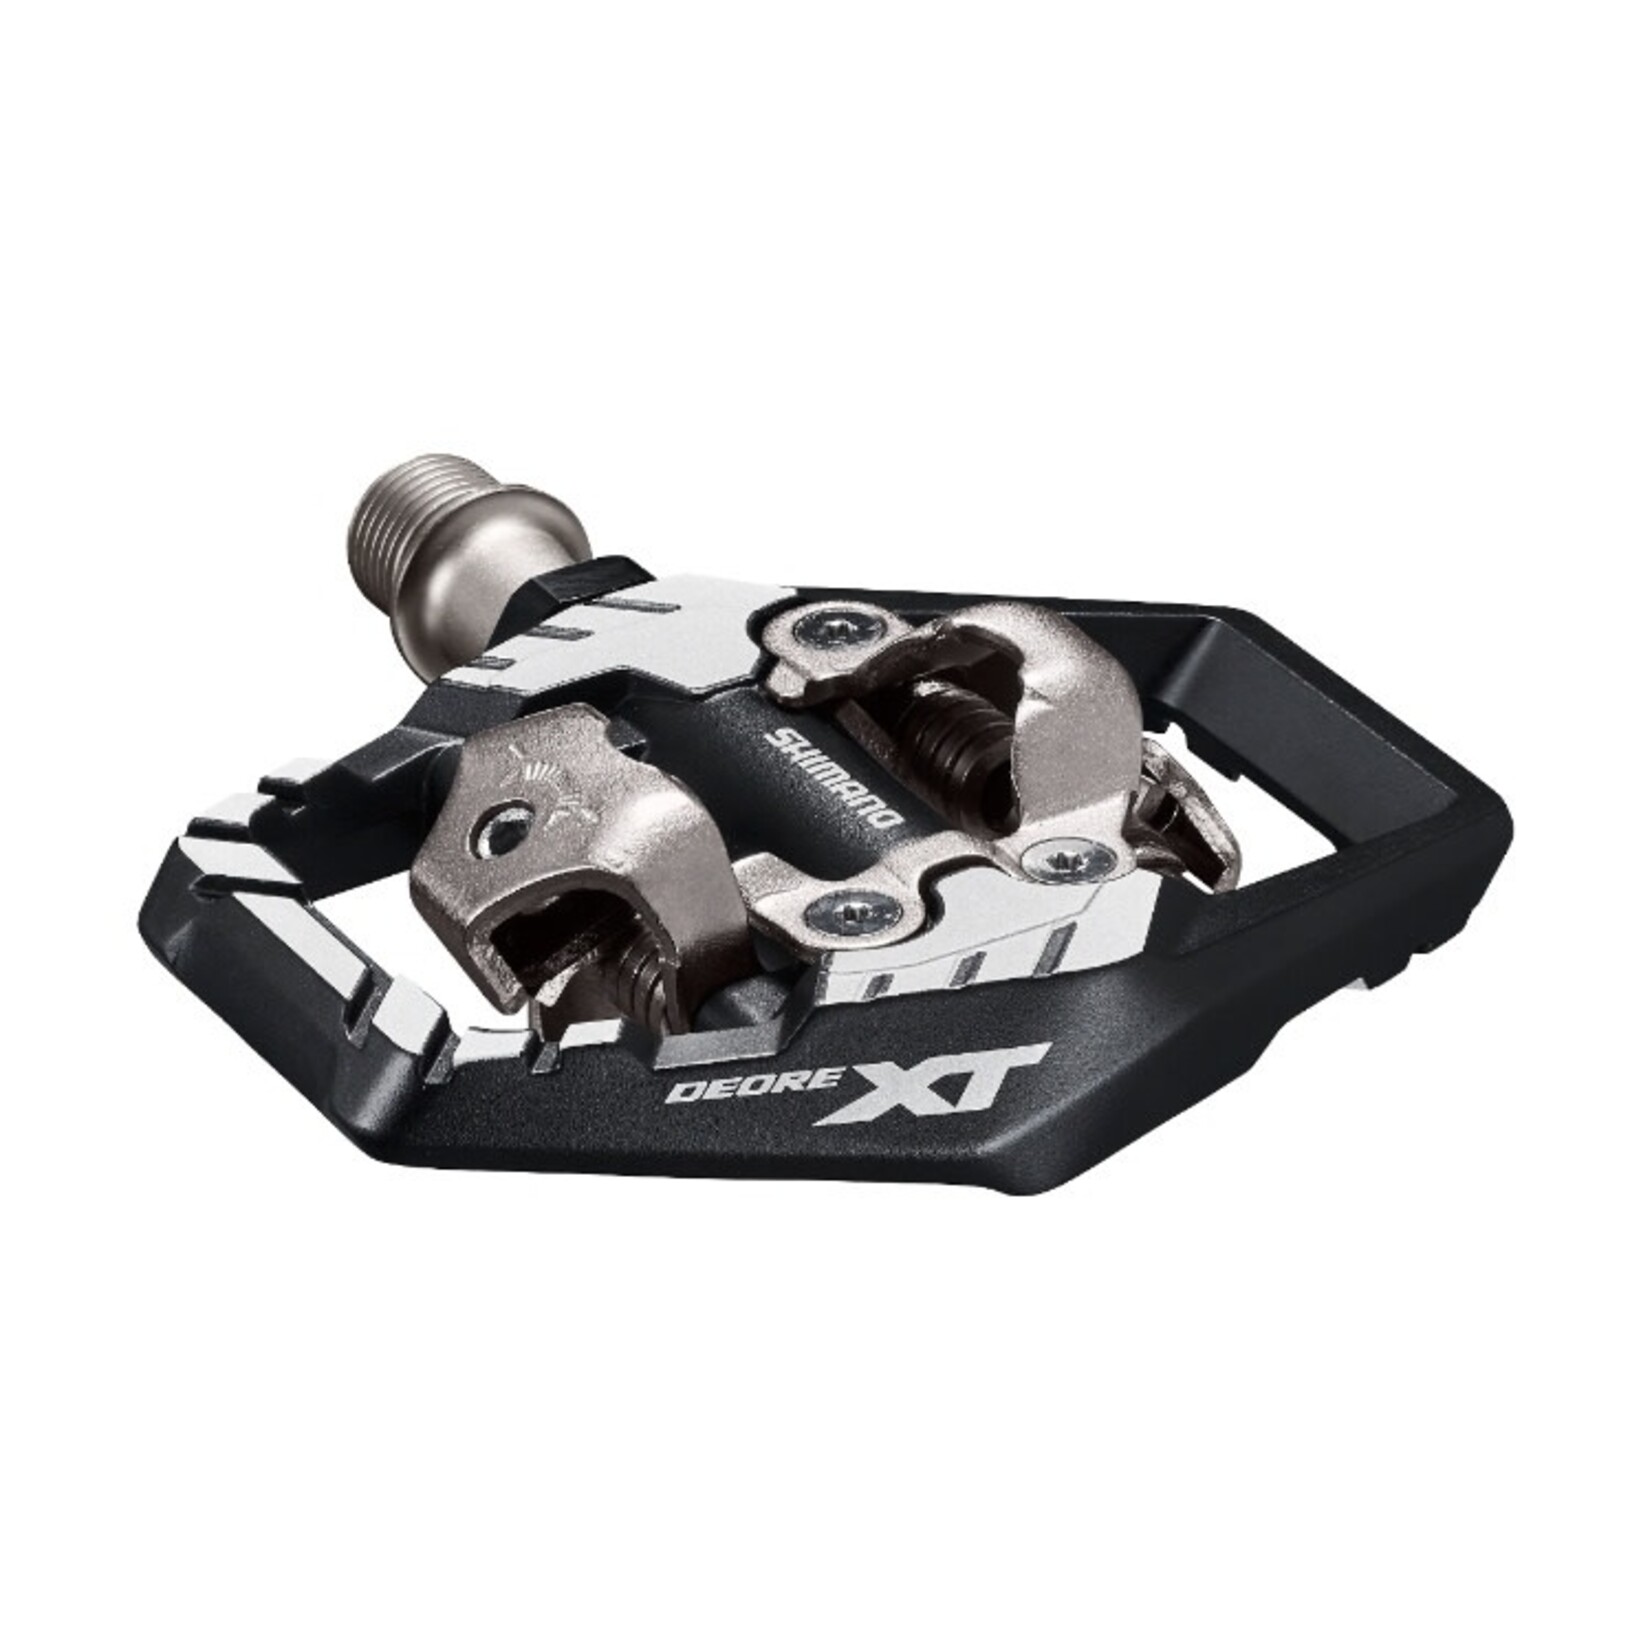 PD-M8120, DEORE XT TRAIL PEDALS